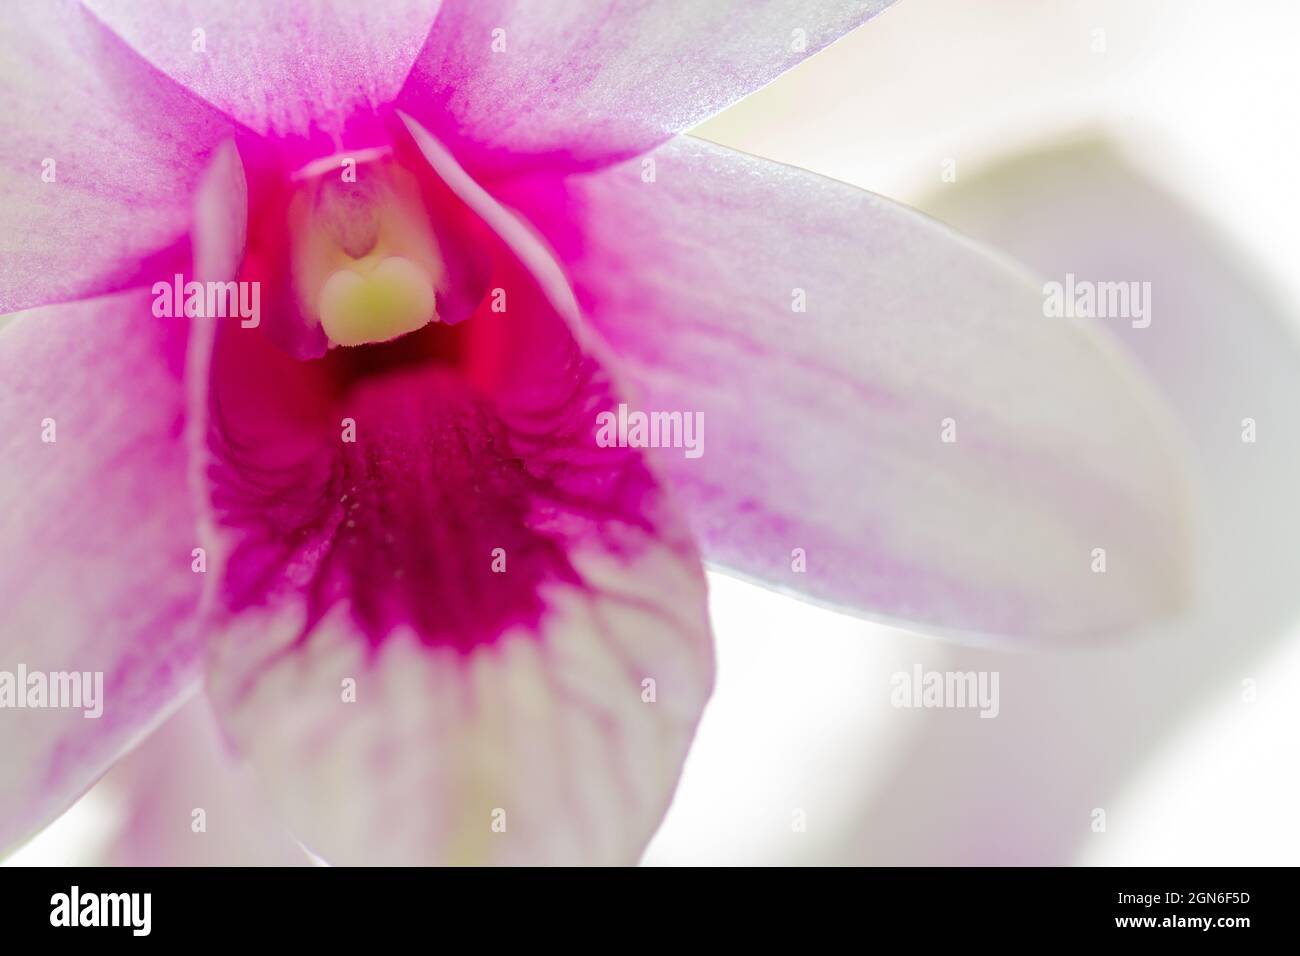 Dendrobium nobile orchid flower on a light background Stock Photo